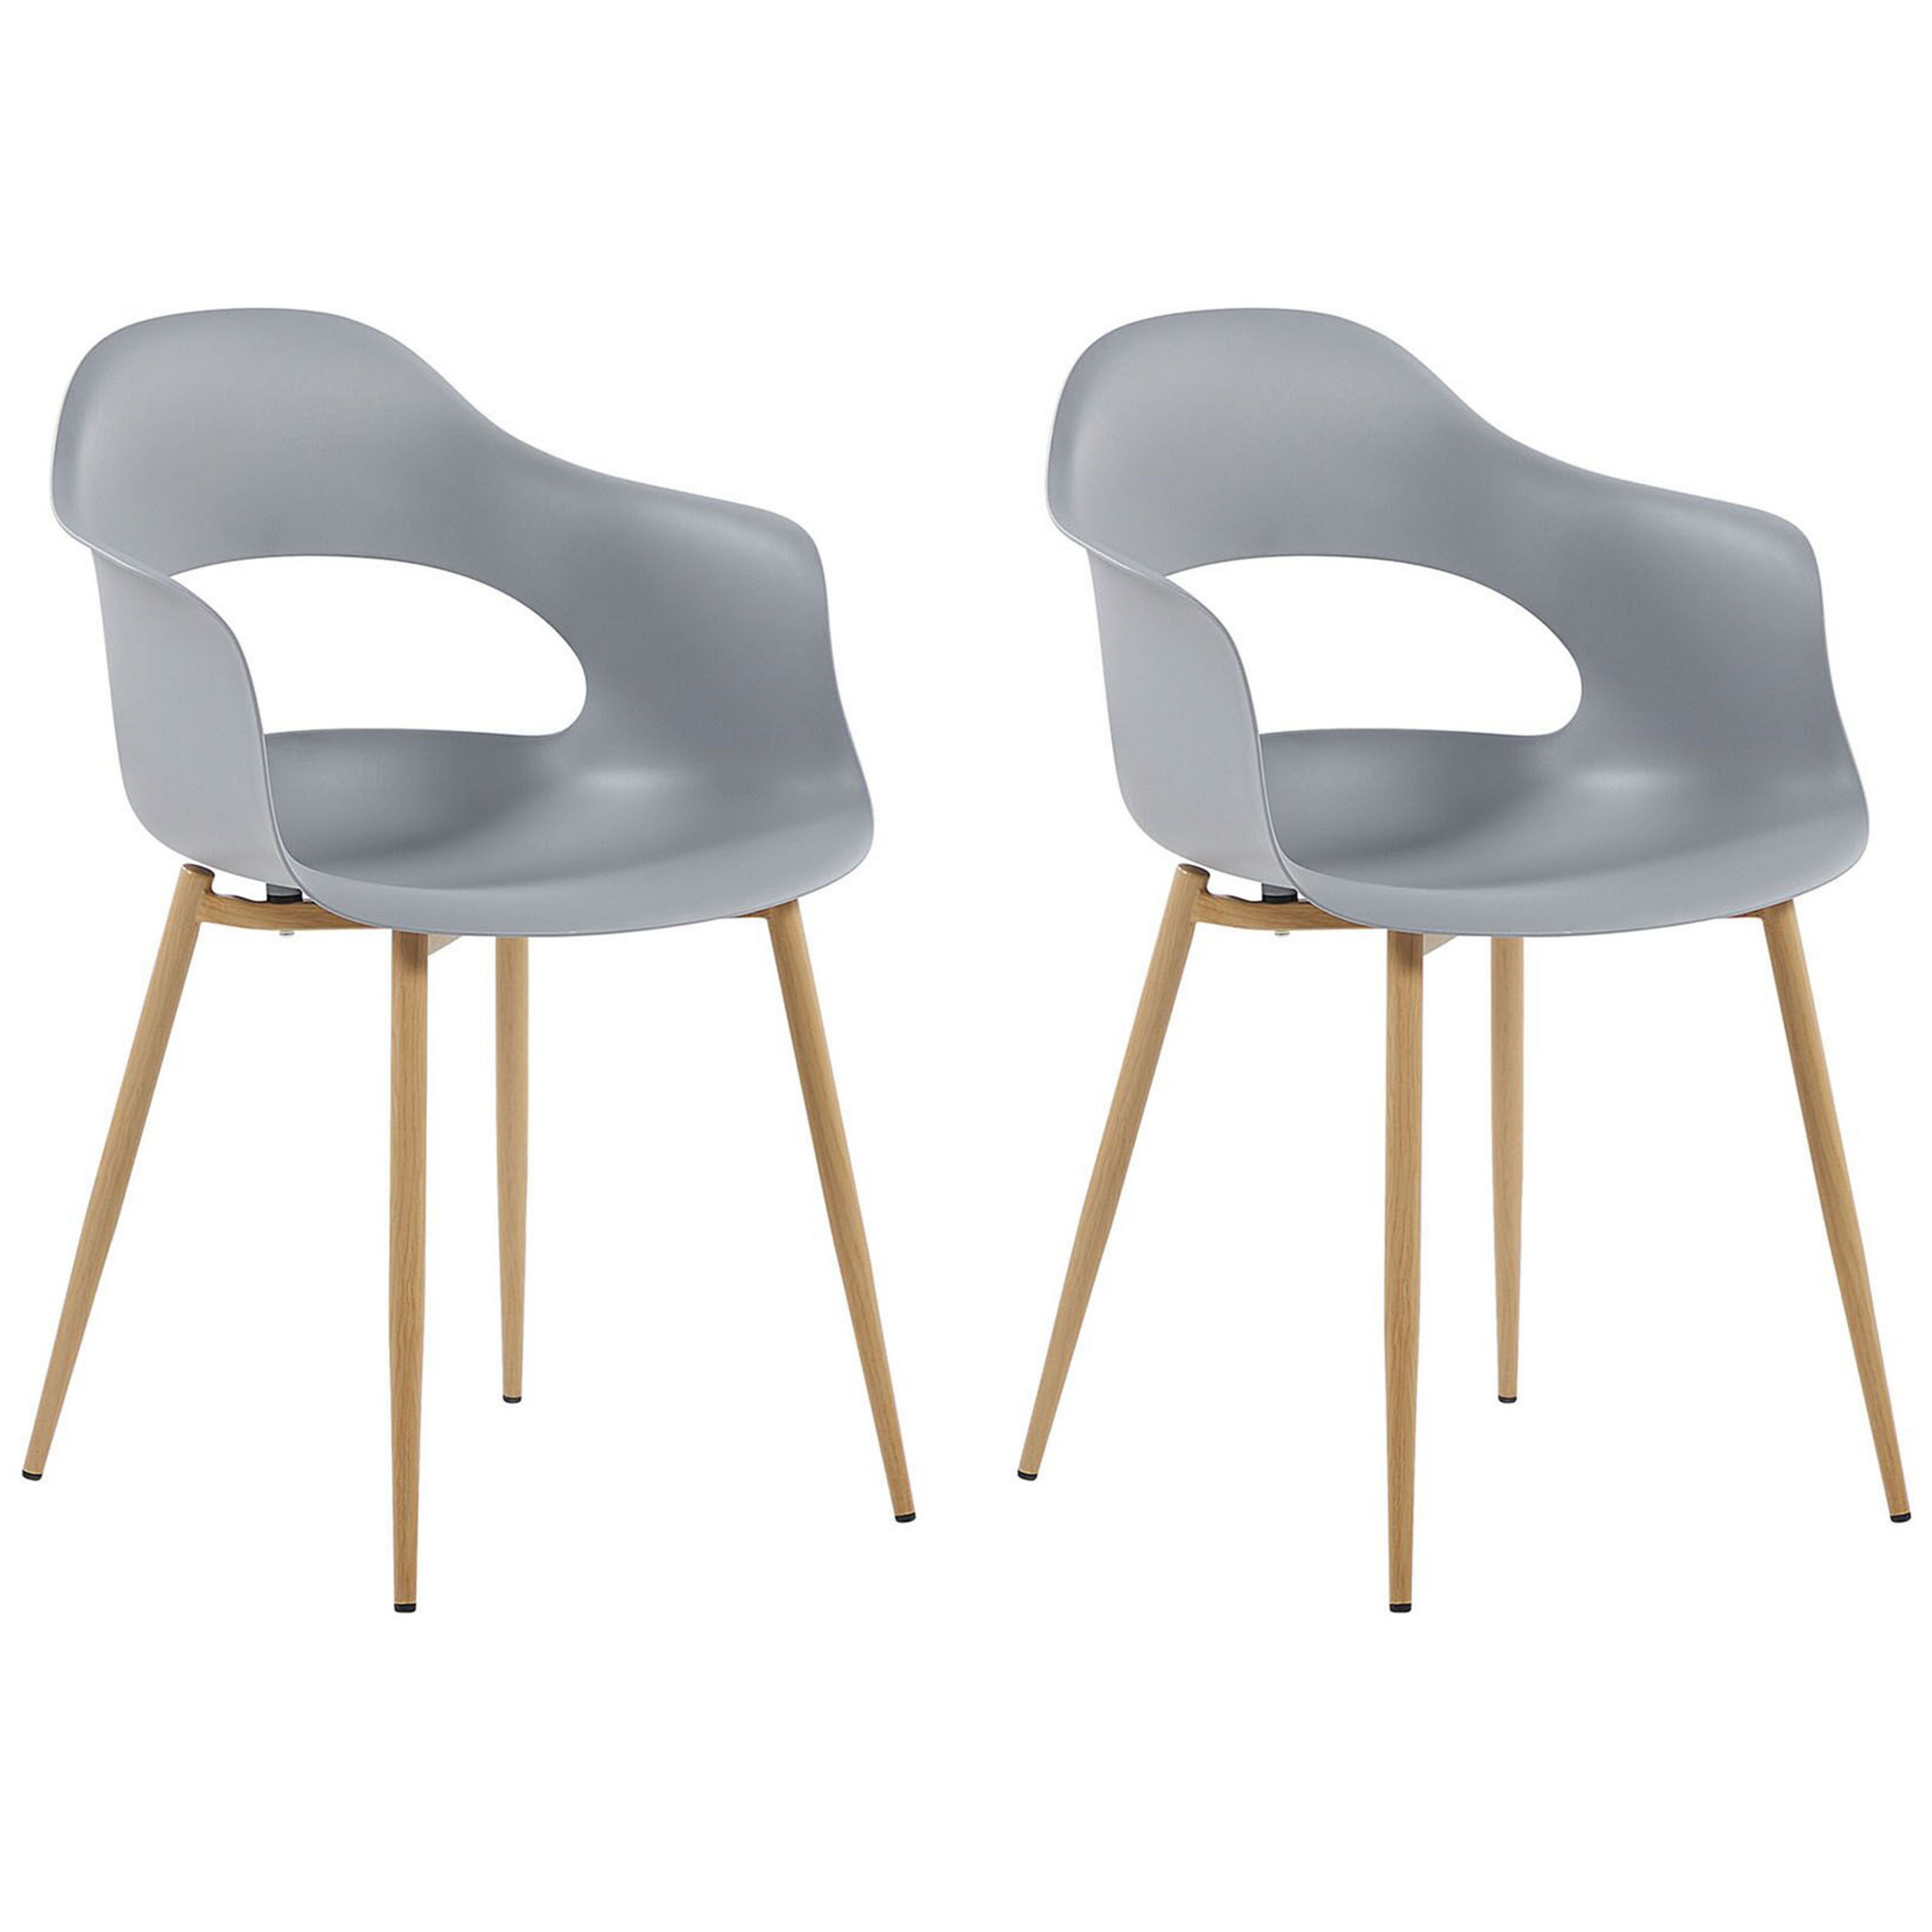 Beliani Set of 2 Dining Chairs Grey Synthetic Material Sleek Legs Decorative